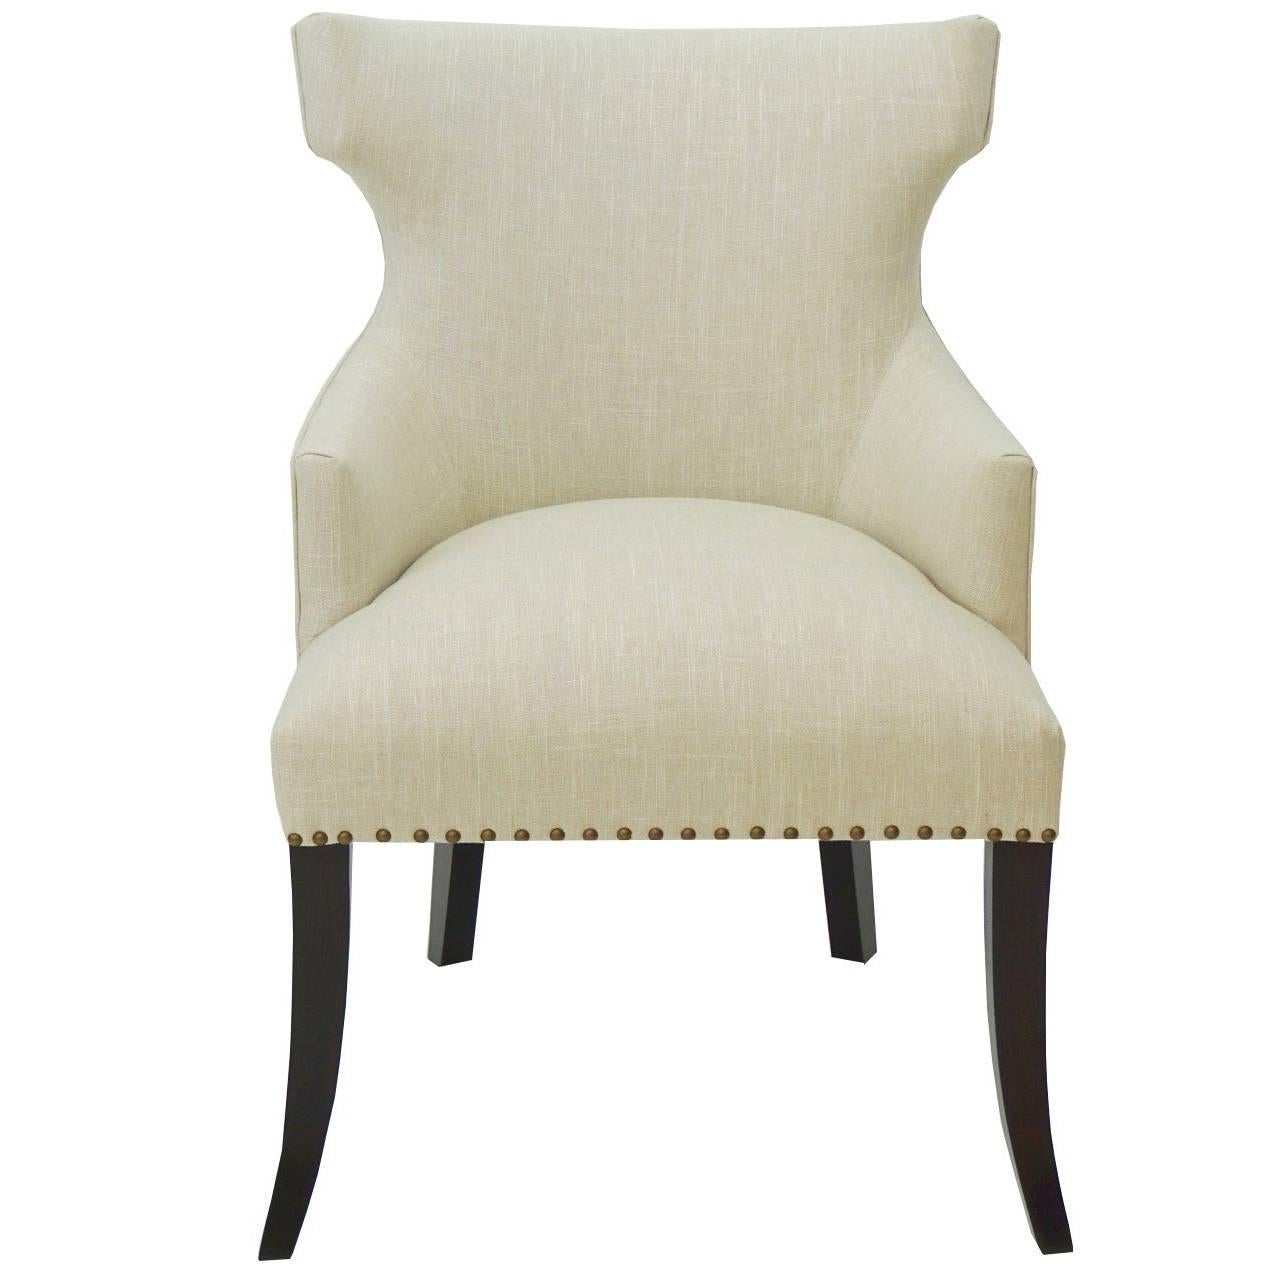 Custom Dining Room Chair with Hourglass Back For Sale